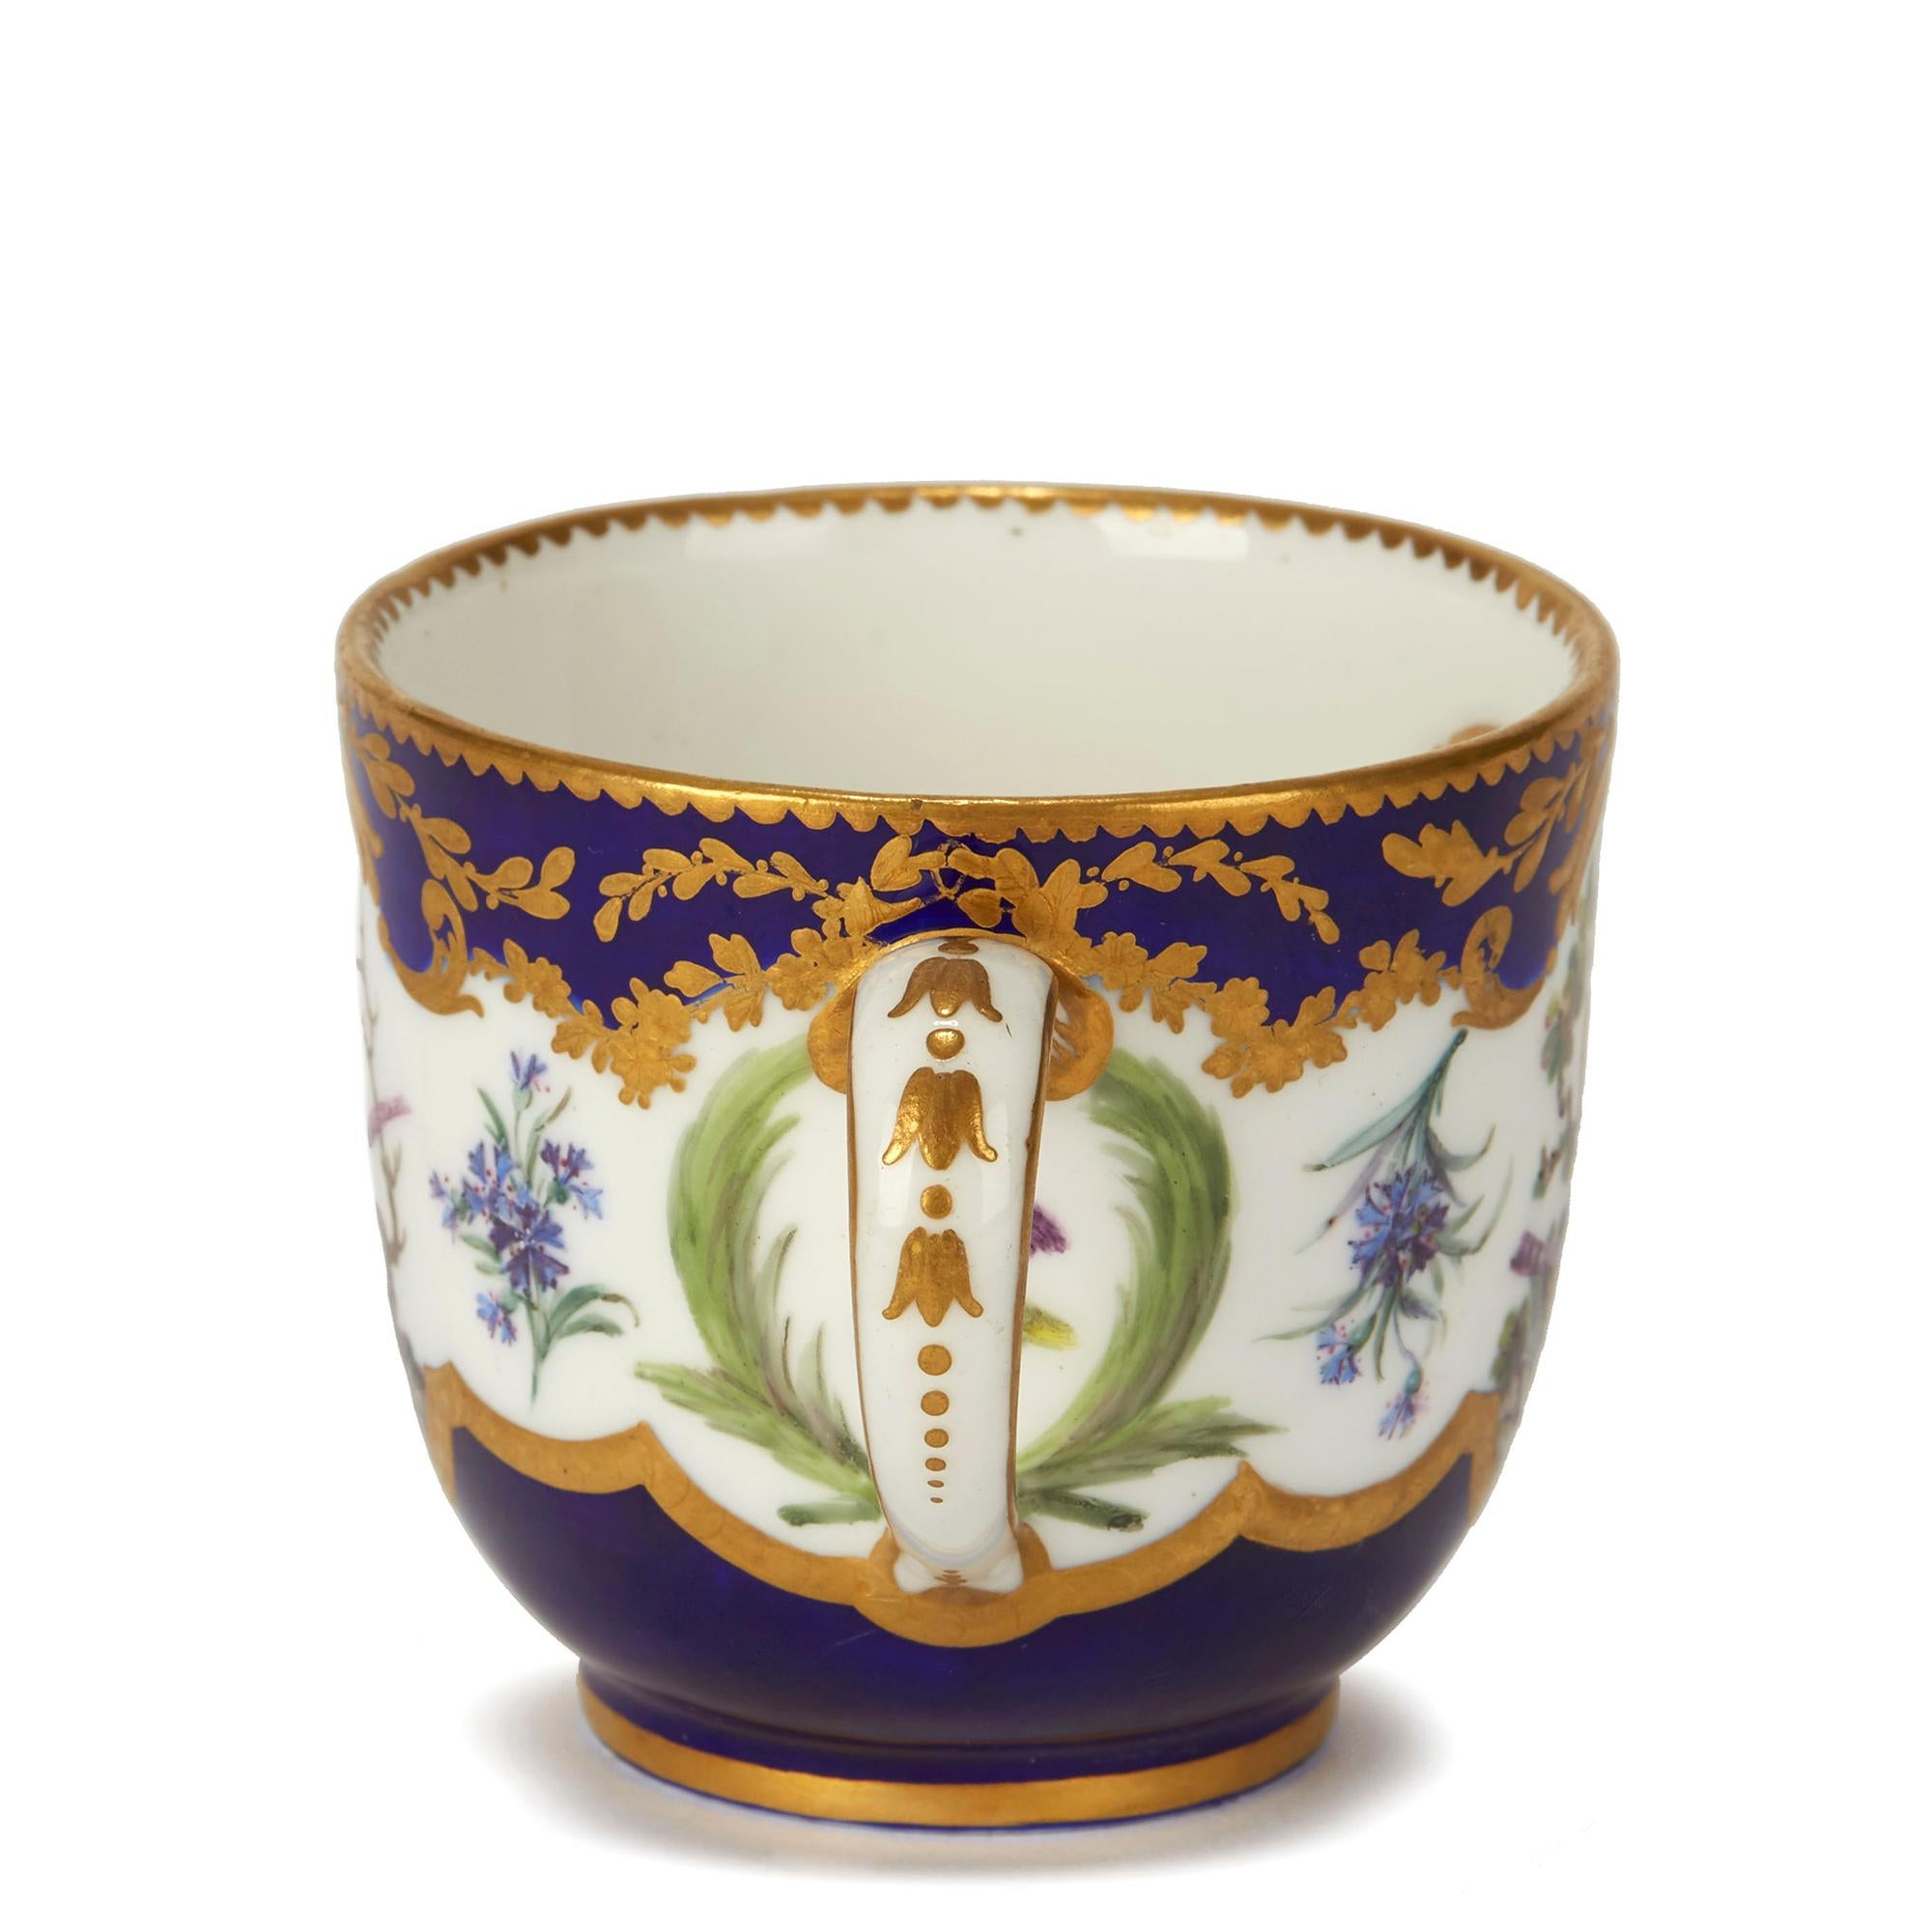 Mid-18th Century Sèvres French Porcelain Hand Painted and Gilded Teacup, circa 1752